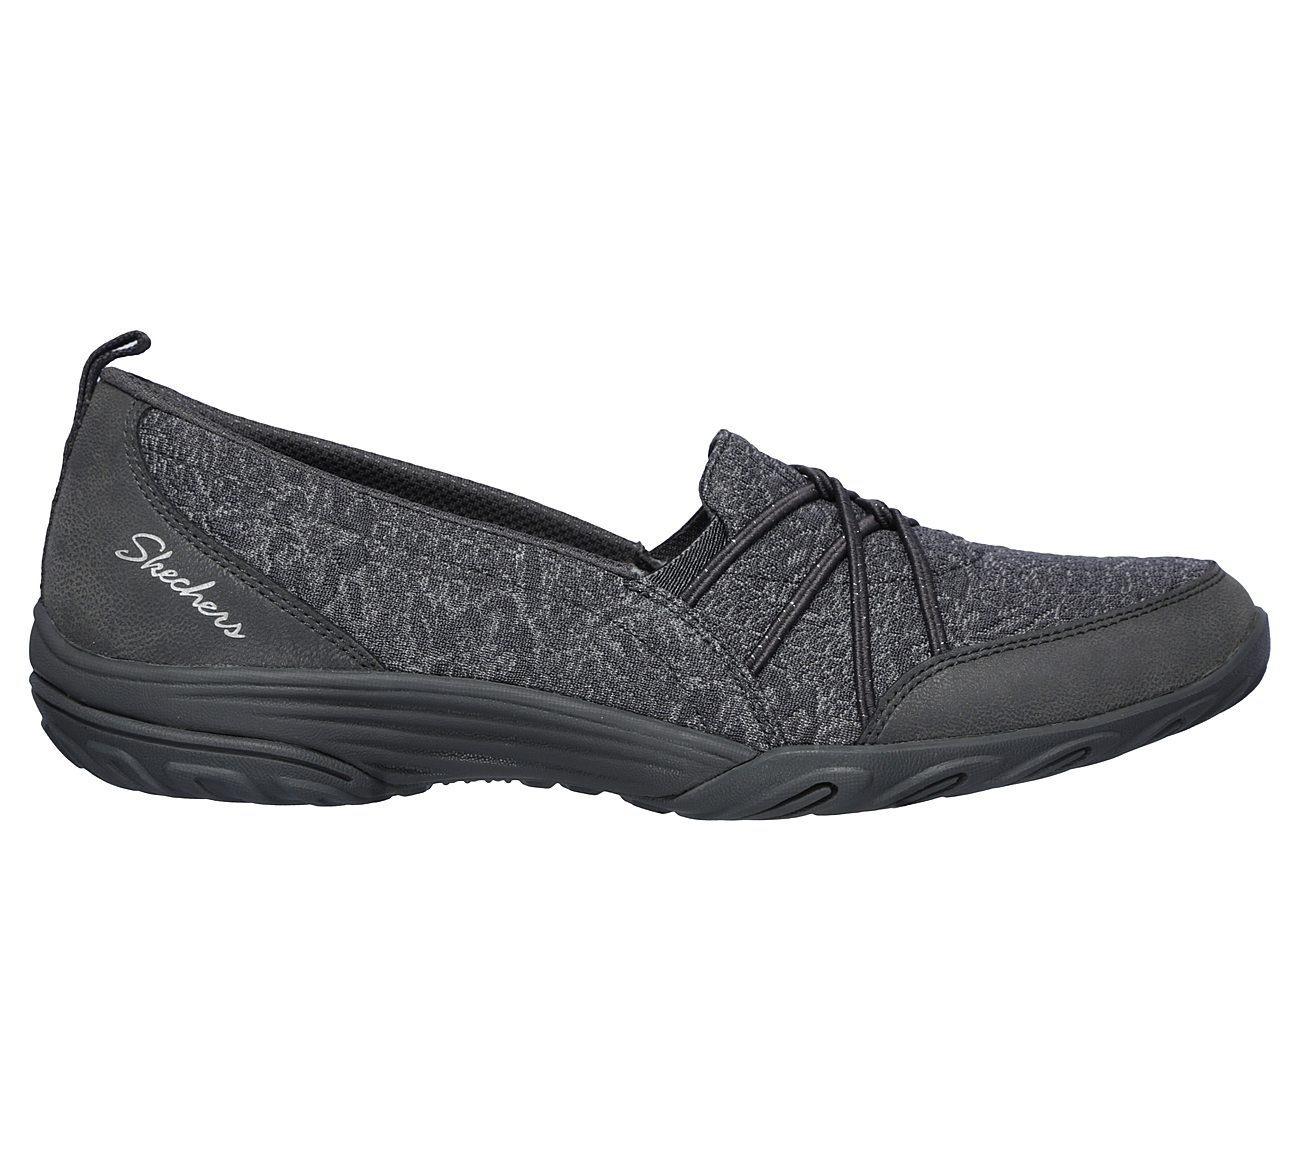 skechers empress air cooled ladies shoes